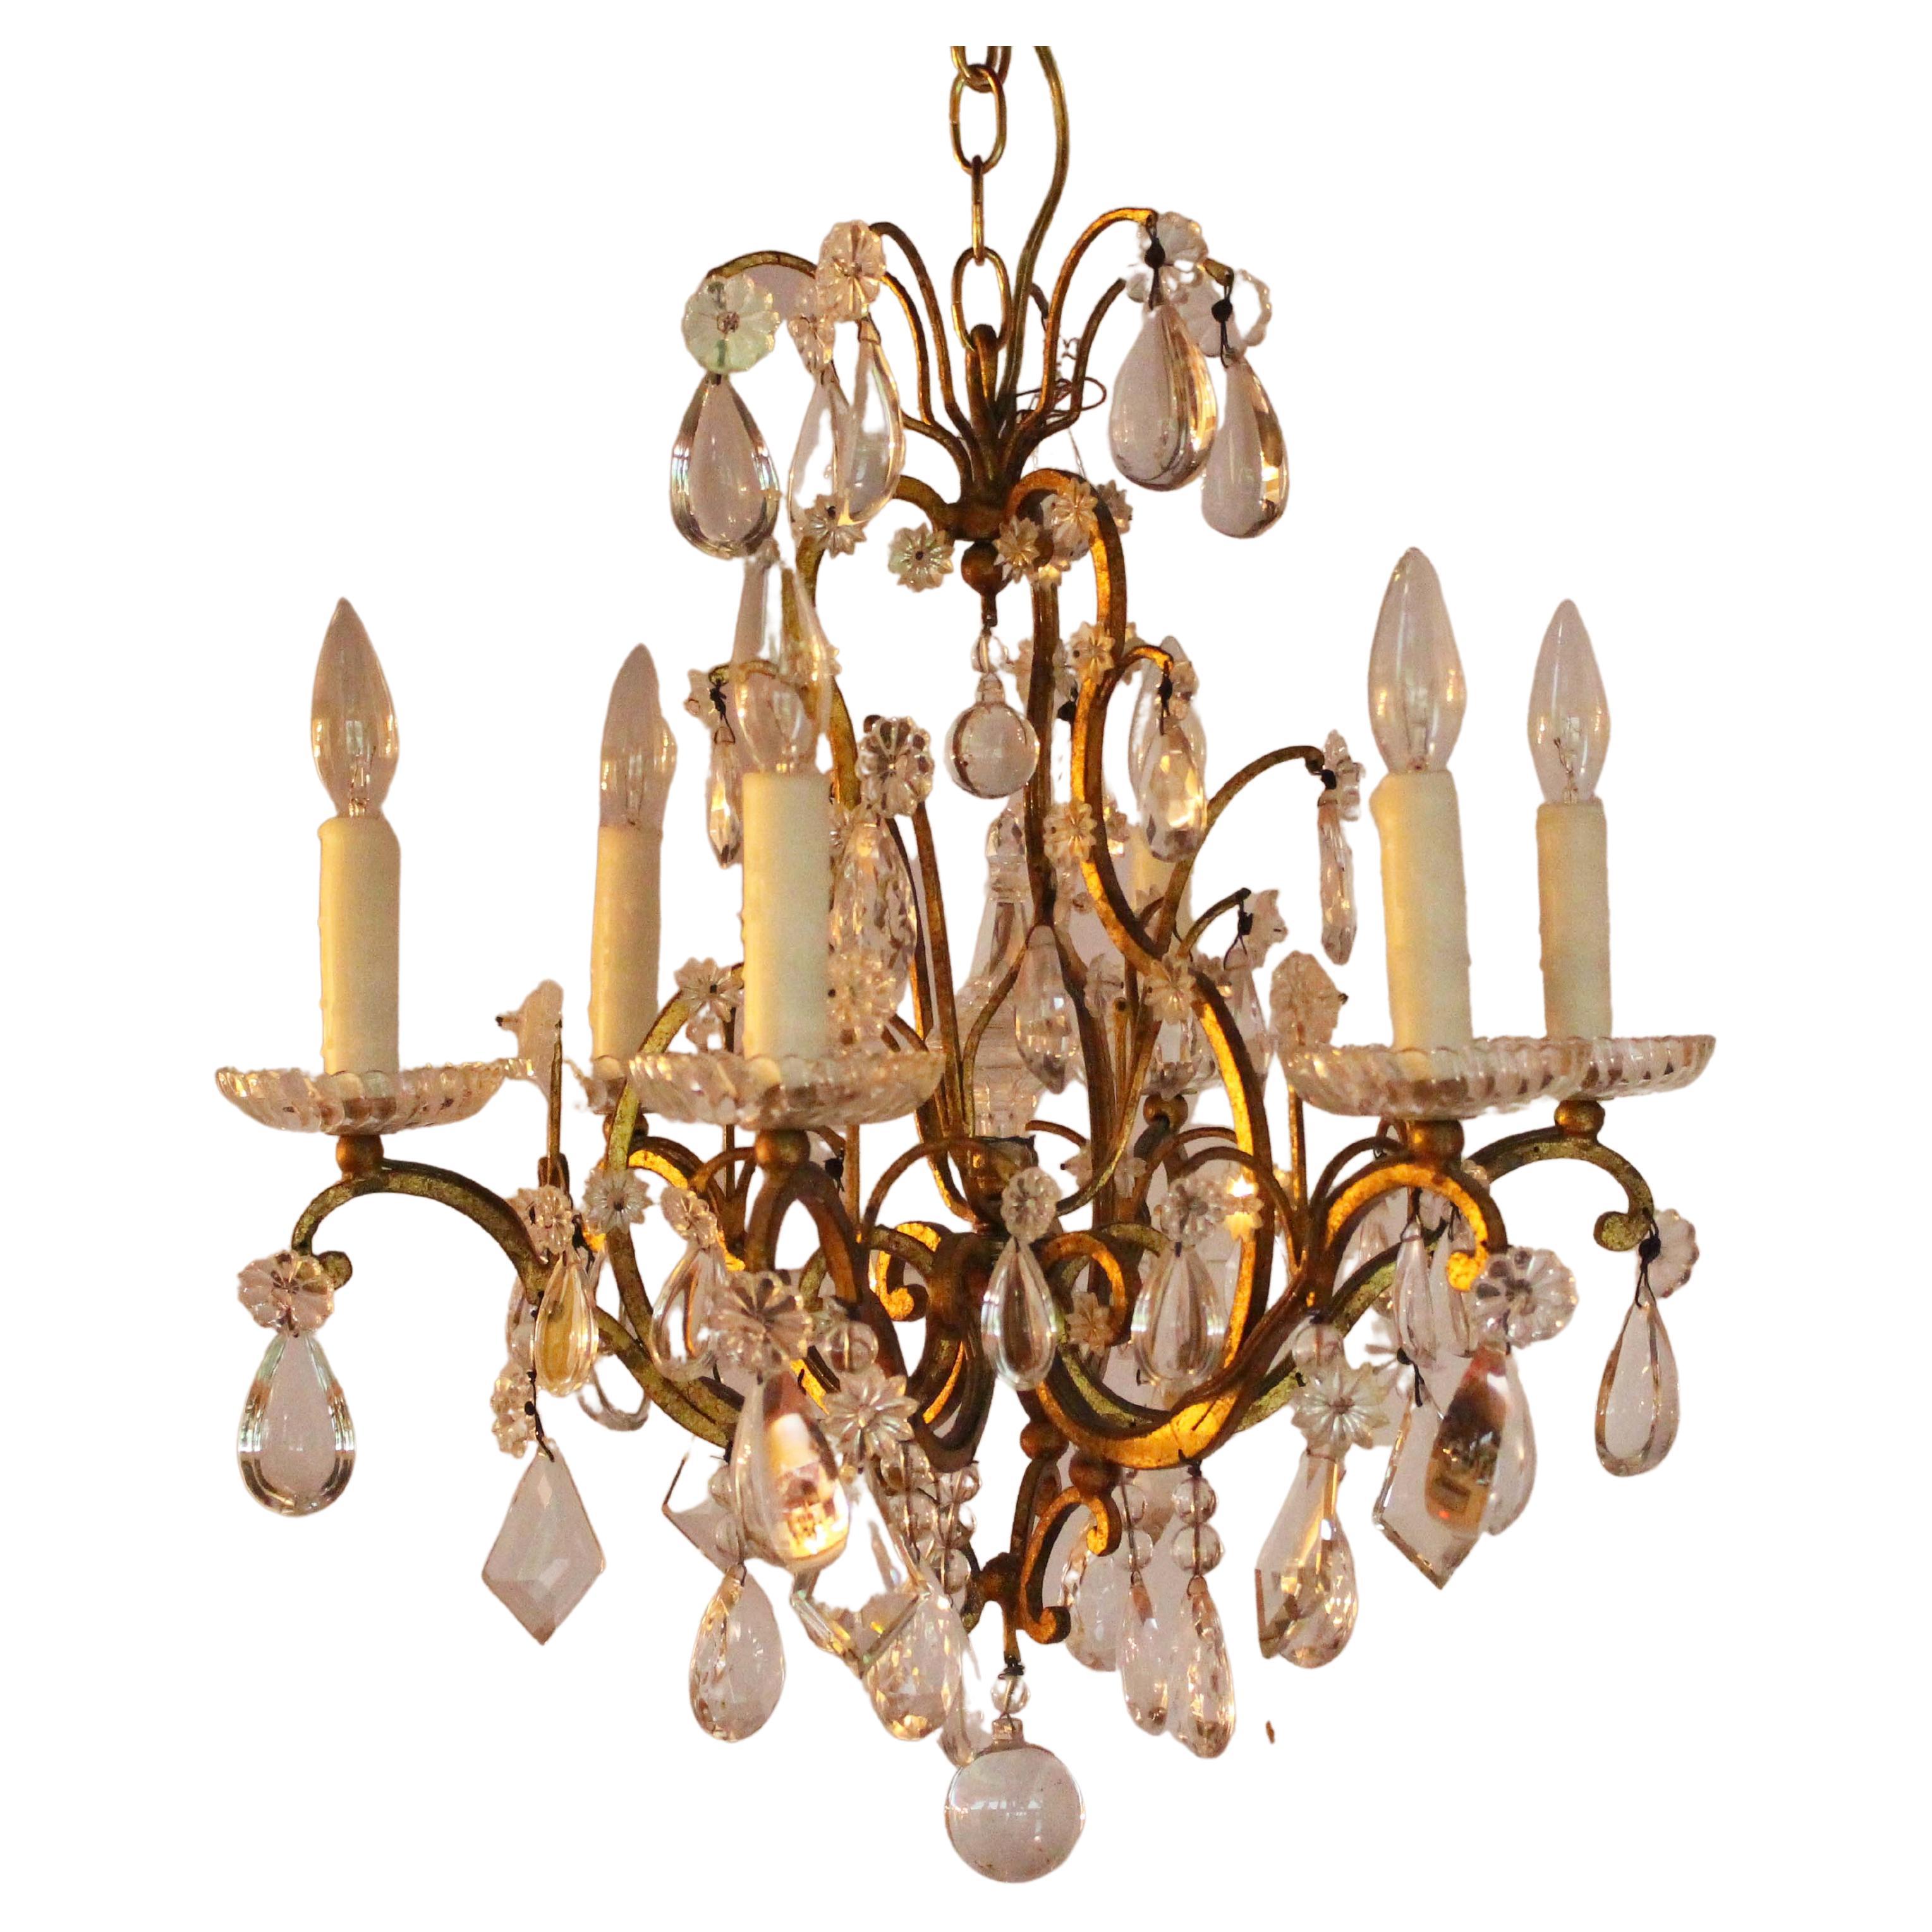 1900, French, Iron & Crystal Chandelier